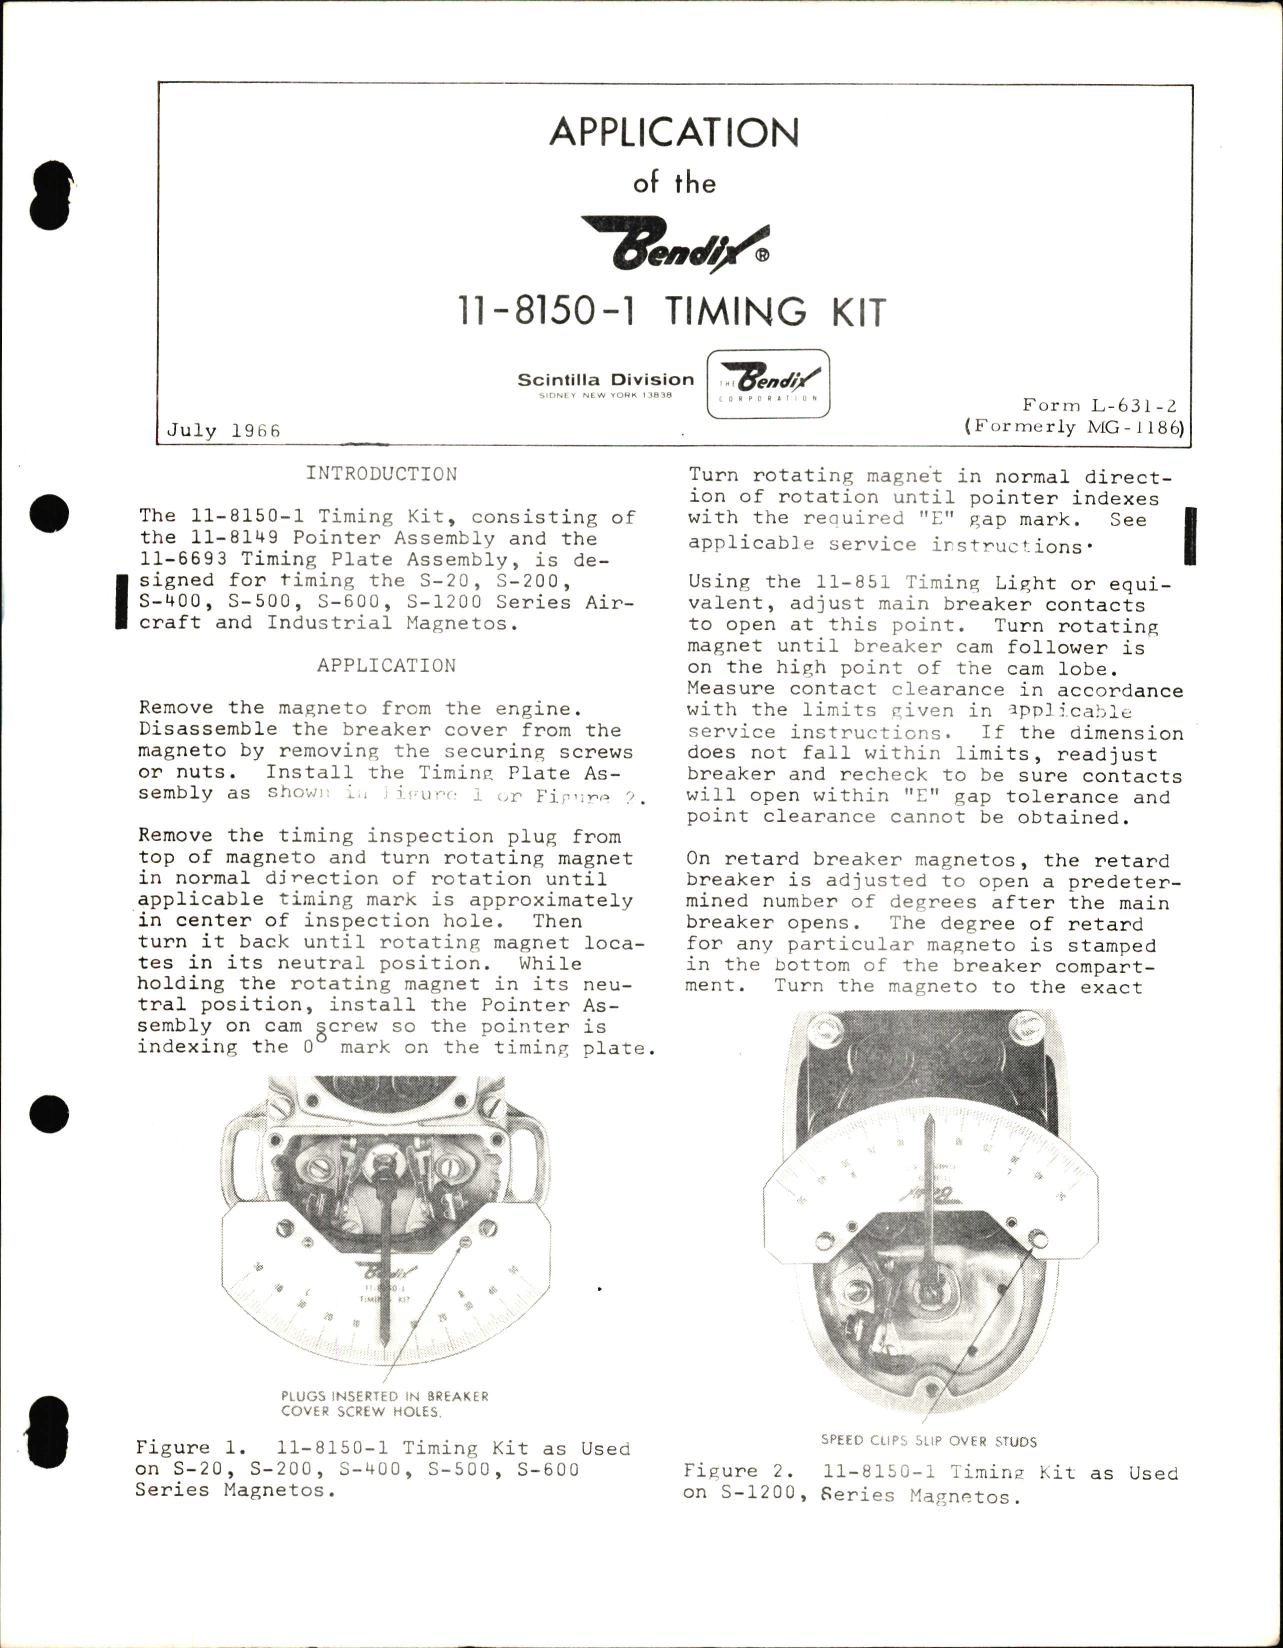 Sample page 1 from AirCorps Library document: Application of the Bendix 11-8150-1 Timing Kit